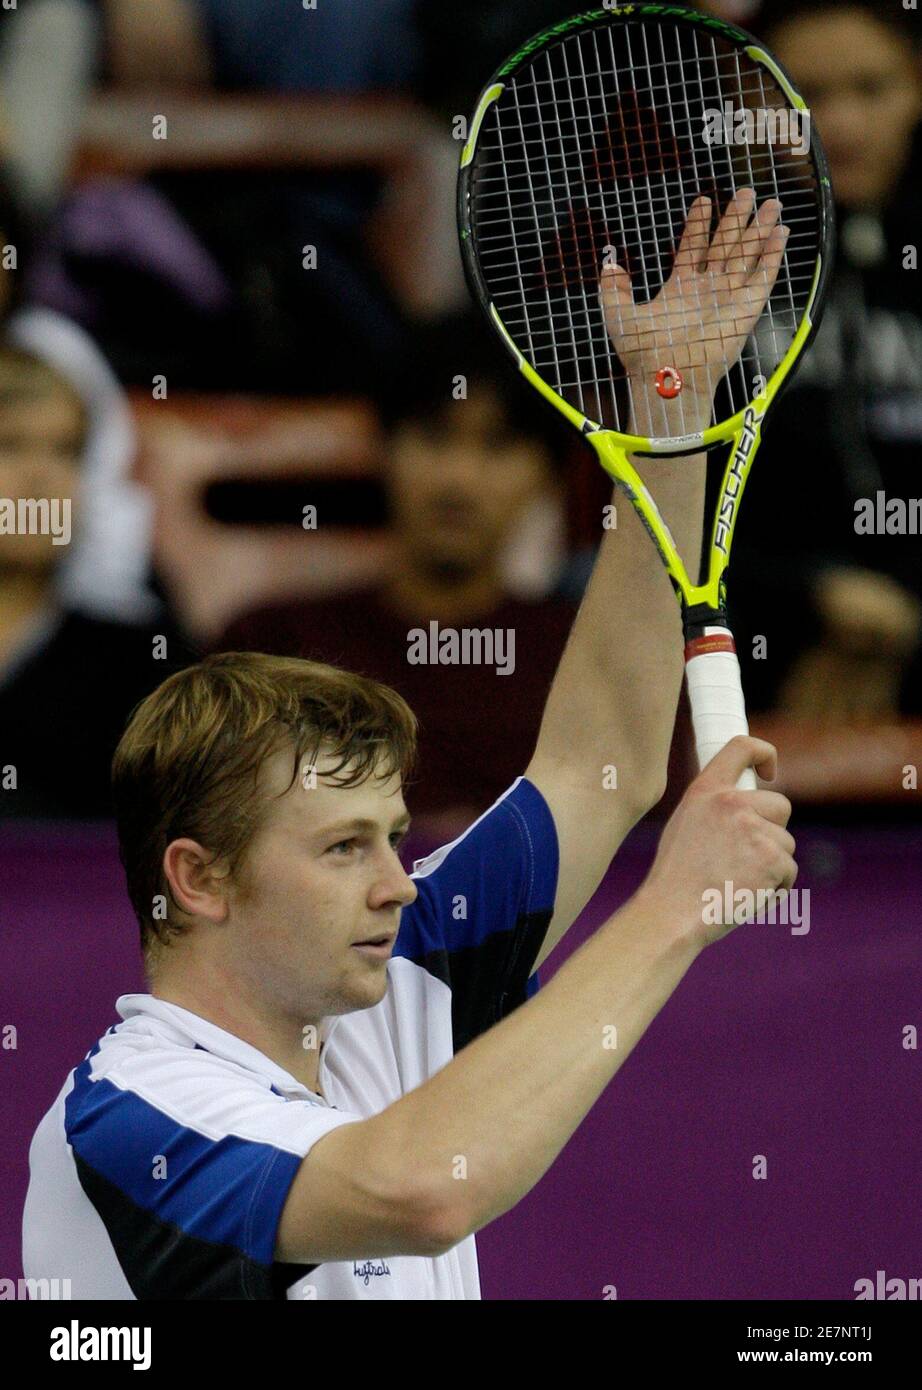 Kazakhstan's Andrey Golubev celebrates his victory against Romania's Victor  Hanescu after their semi-final match at the St. Petersburg Open tennis  tournament October 25, 2008. REUTERS/Alexander Demianchuk (RUSSIA Stock  Photo - Alamy